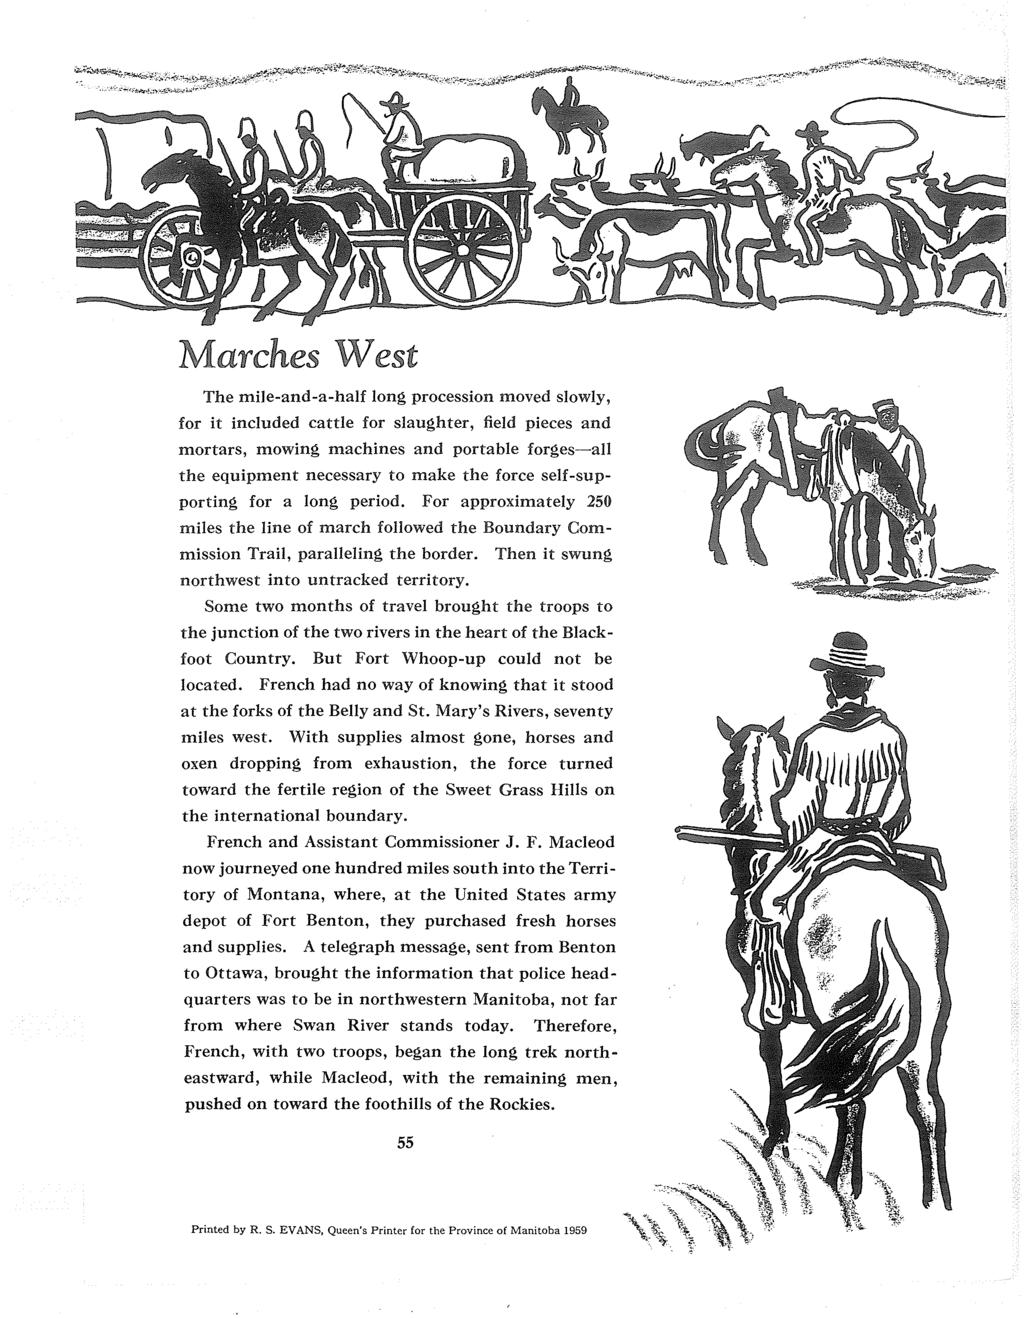 Marches West The mije-and-a-half long procession moved slowly, for it included cattle for slaughter, field pieces and mortars, mowing machines and portable forges-all the equipment necessary to make